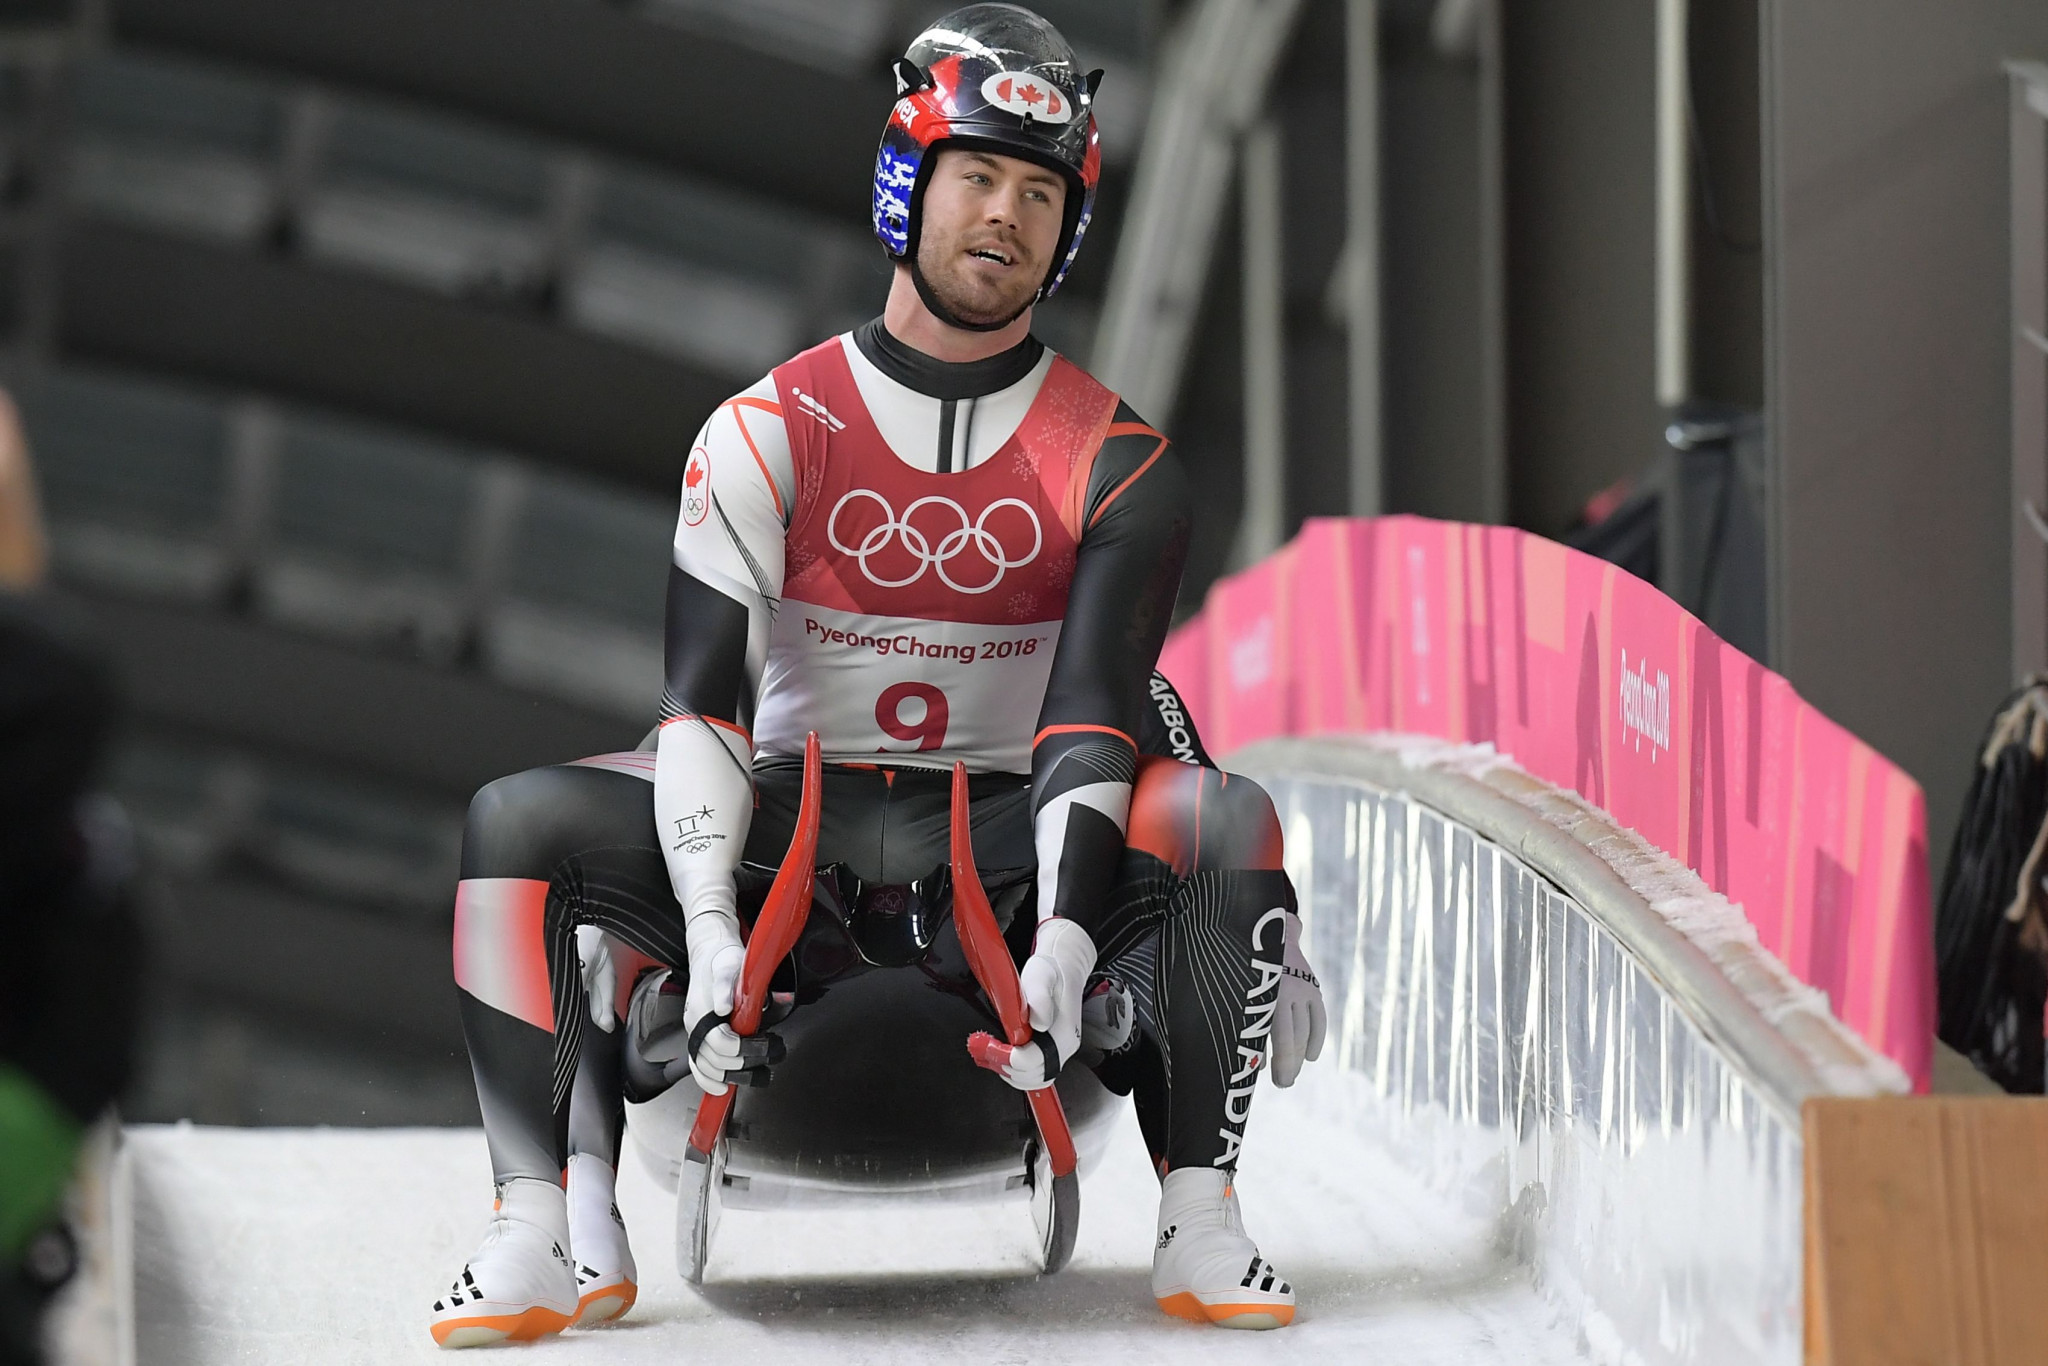 The Canadian luge team are set to return to World Cup action in the new year ©Getty Images